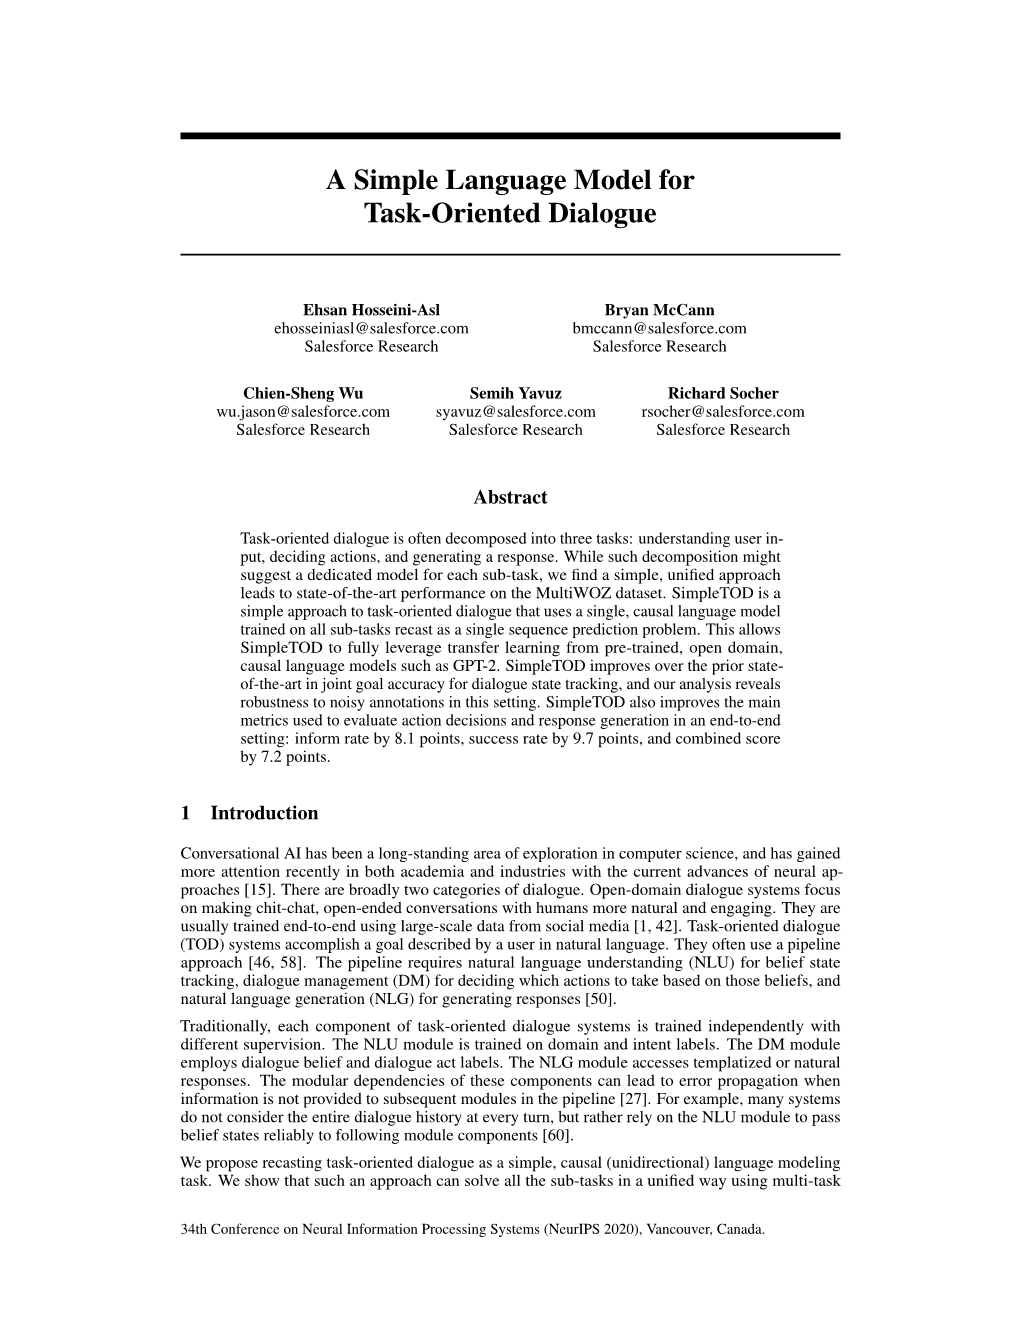 A Simple Language Model for Task-Oriented Dialogue